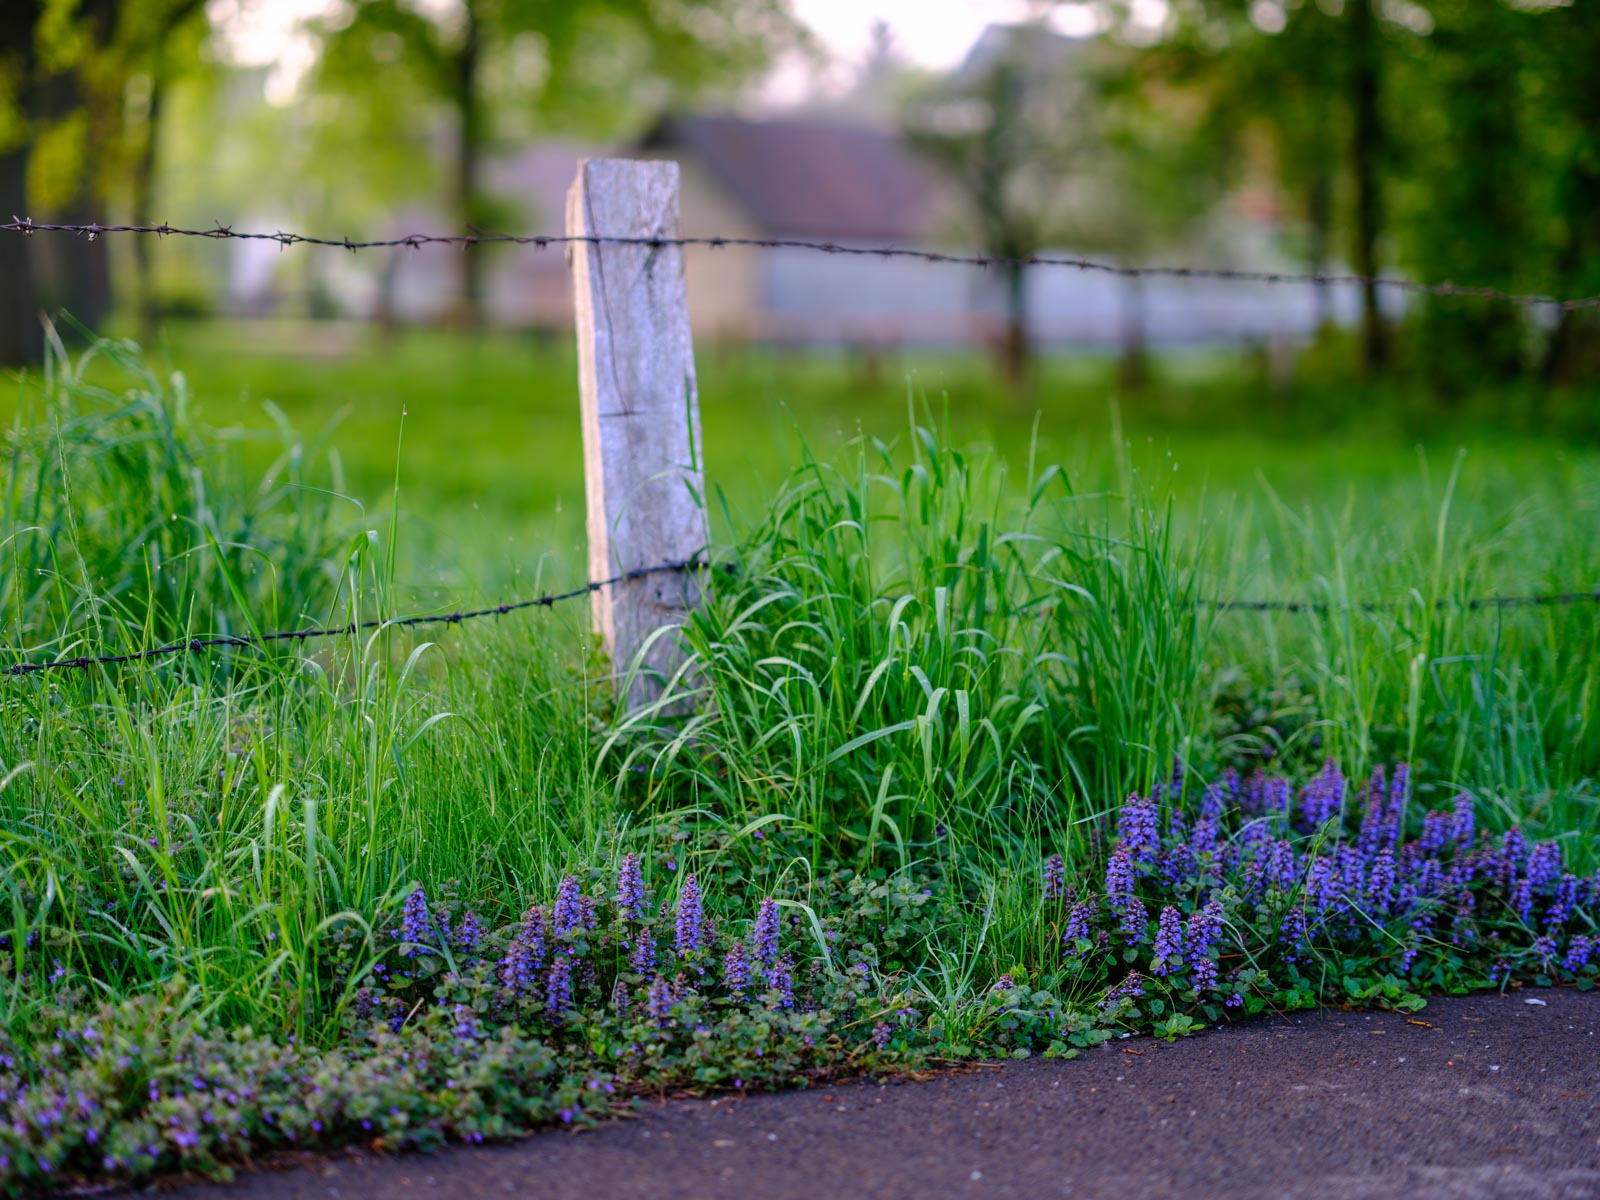 Common bugle (Ajuga reptans) on a fence in Bielefeld-Sieker in May 2021 (Germany).